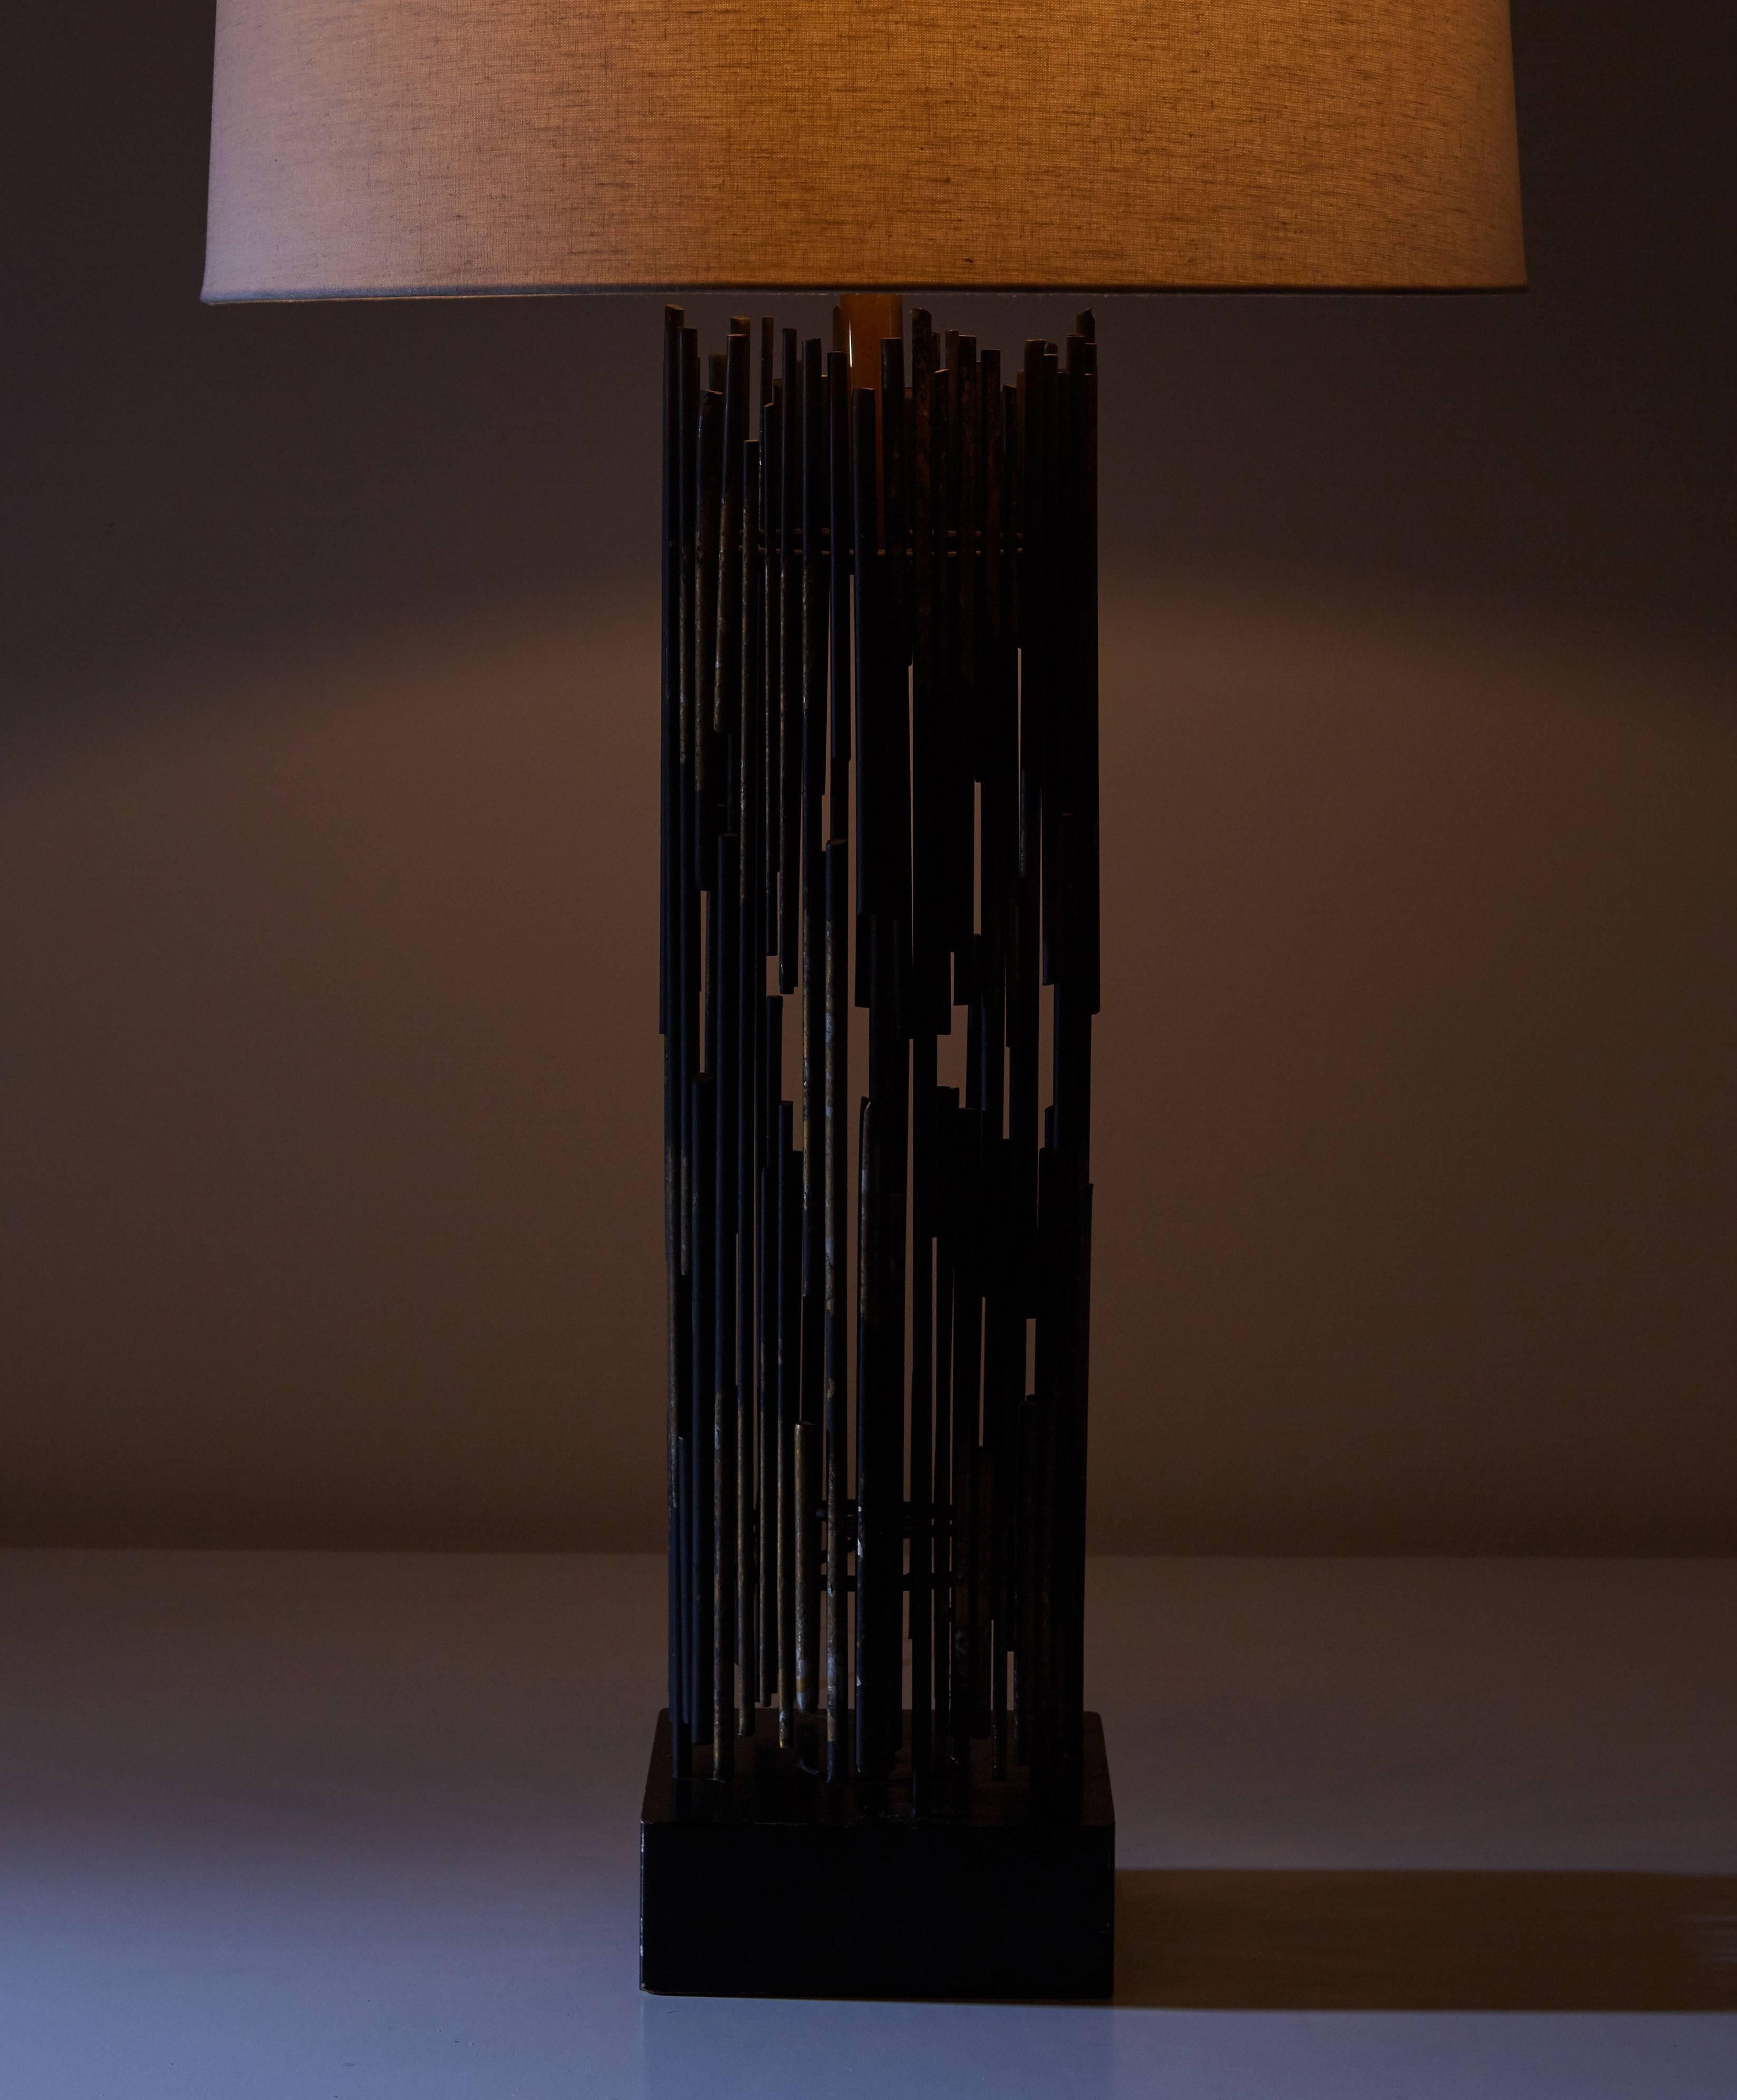 Iron table lamp by Kneedler-Fauchiere designed in the United States, circa 1960s. Welded iron rods with applied gold leaf and steel base. Rewired. Takes one E26 100w maximum bulb. Shade not included. Custom shade fabrication available.